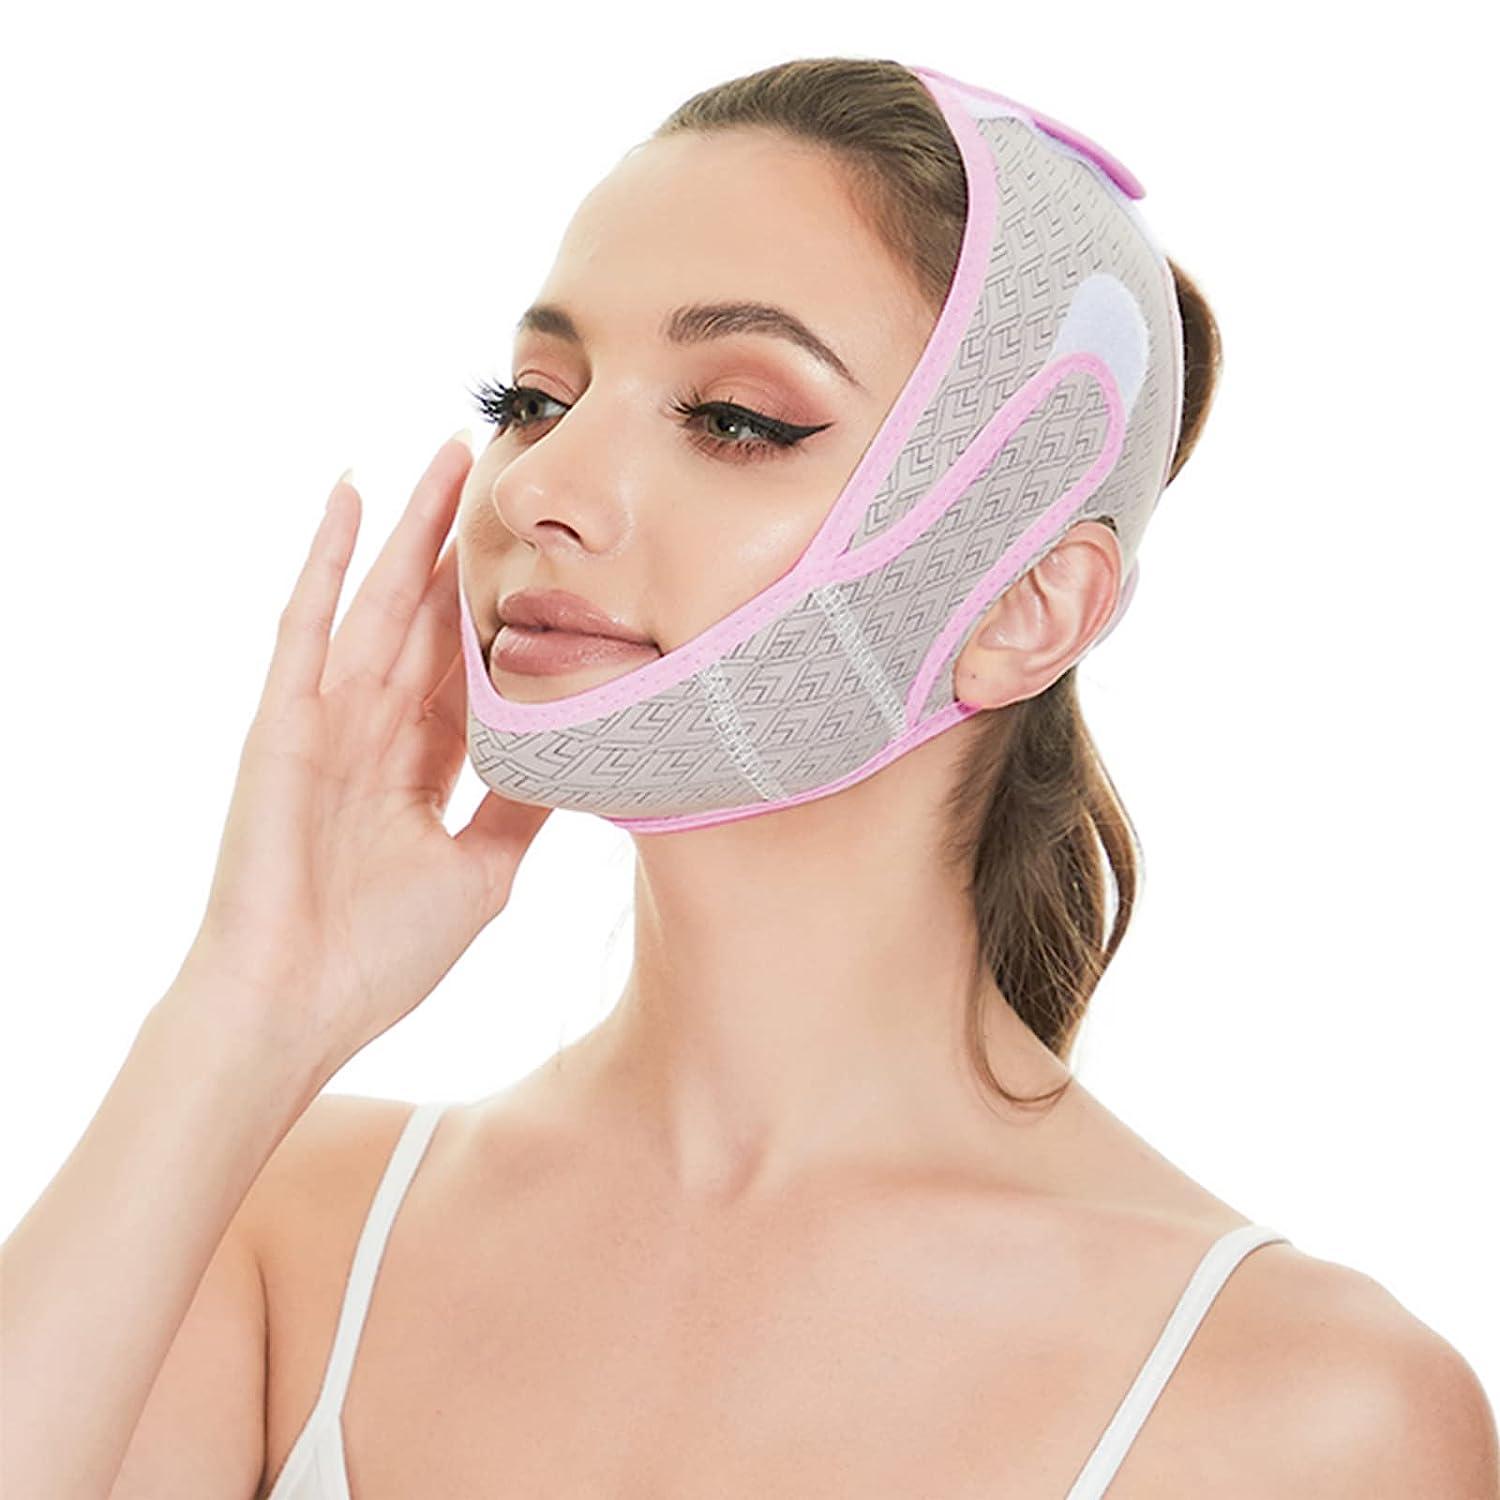 V Line Lifting Mask Double Chin Reducer for Men and Women - Face Slimming  Belt for Sagging Skin - Reusable and Washable